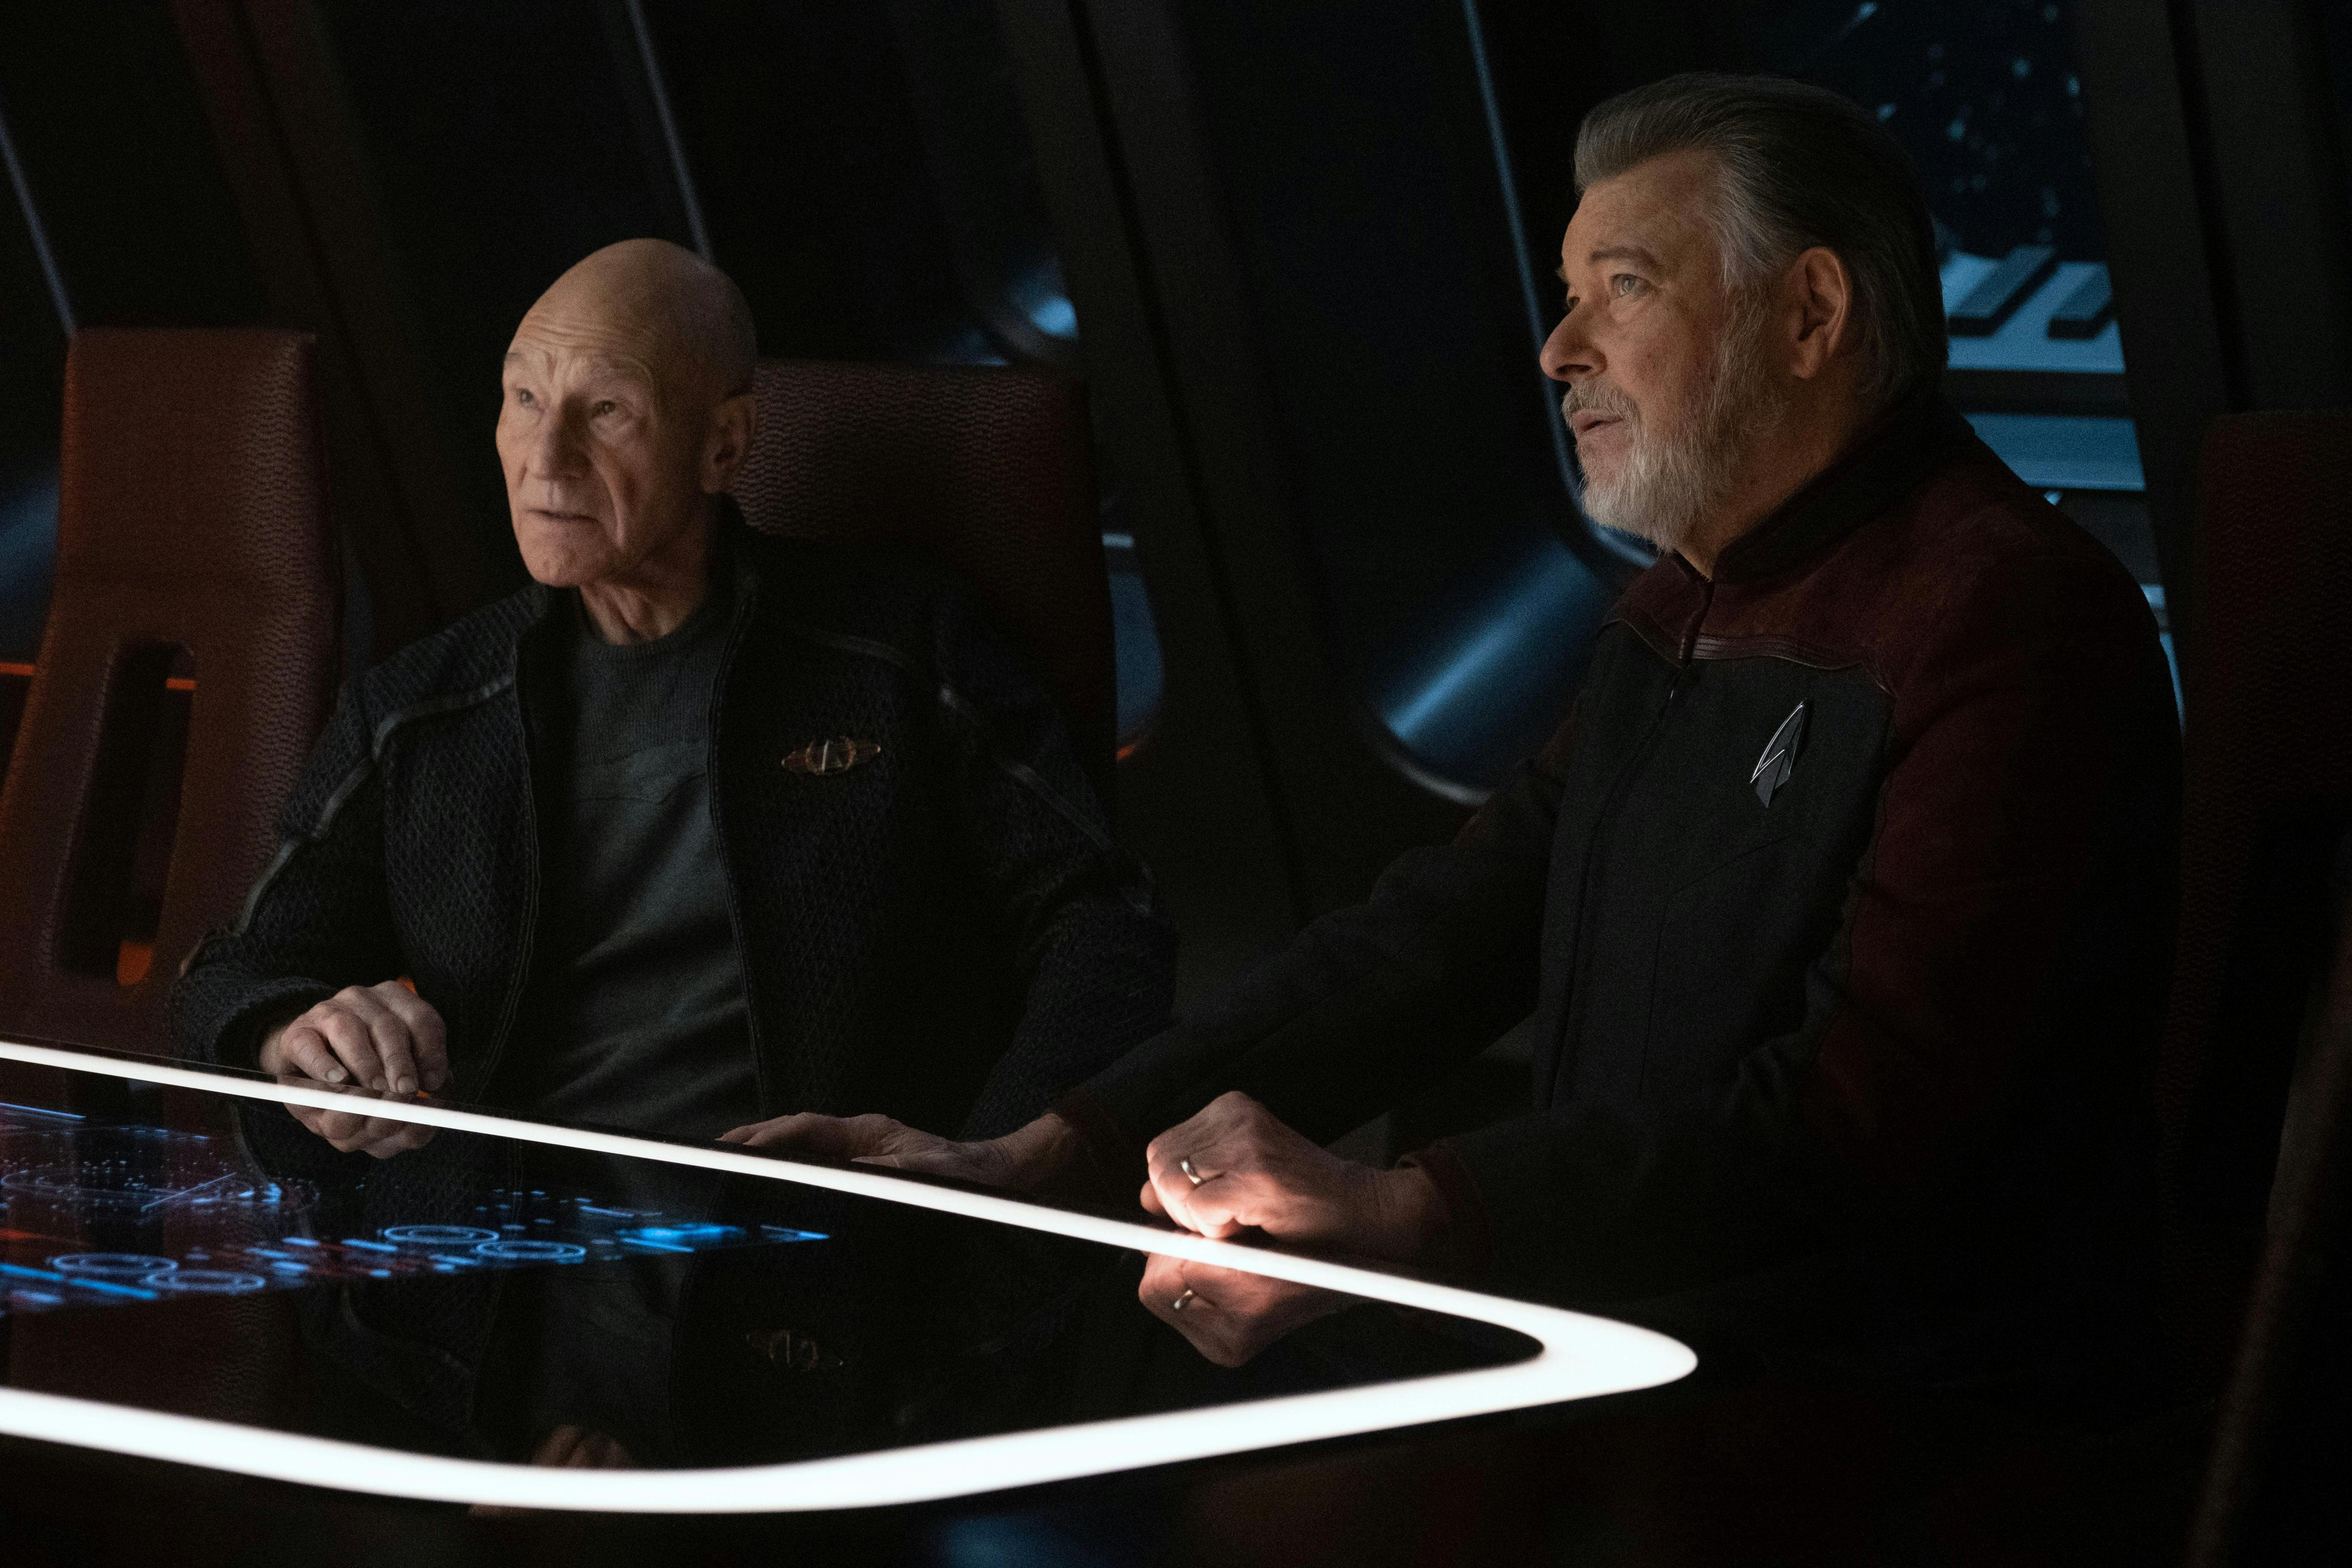 Picard and Riker sit in the Observation Lounge of the Titan and look up and forward